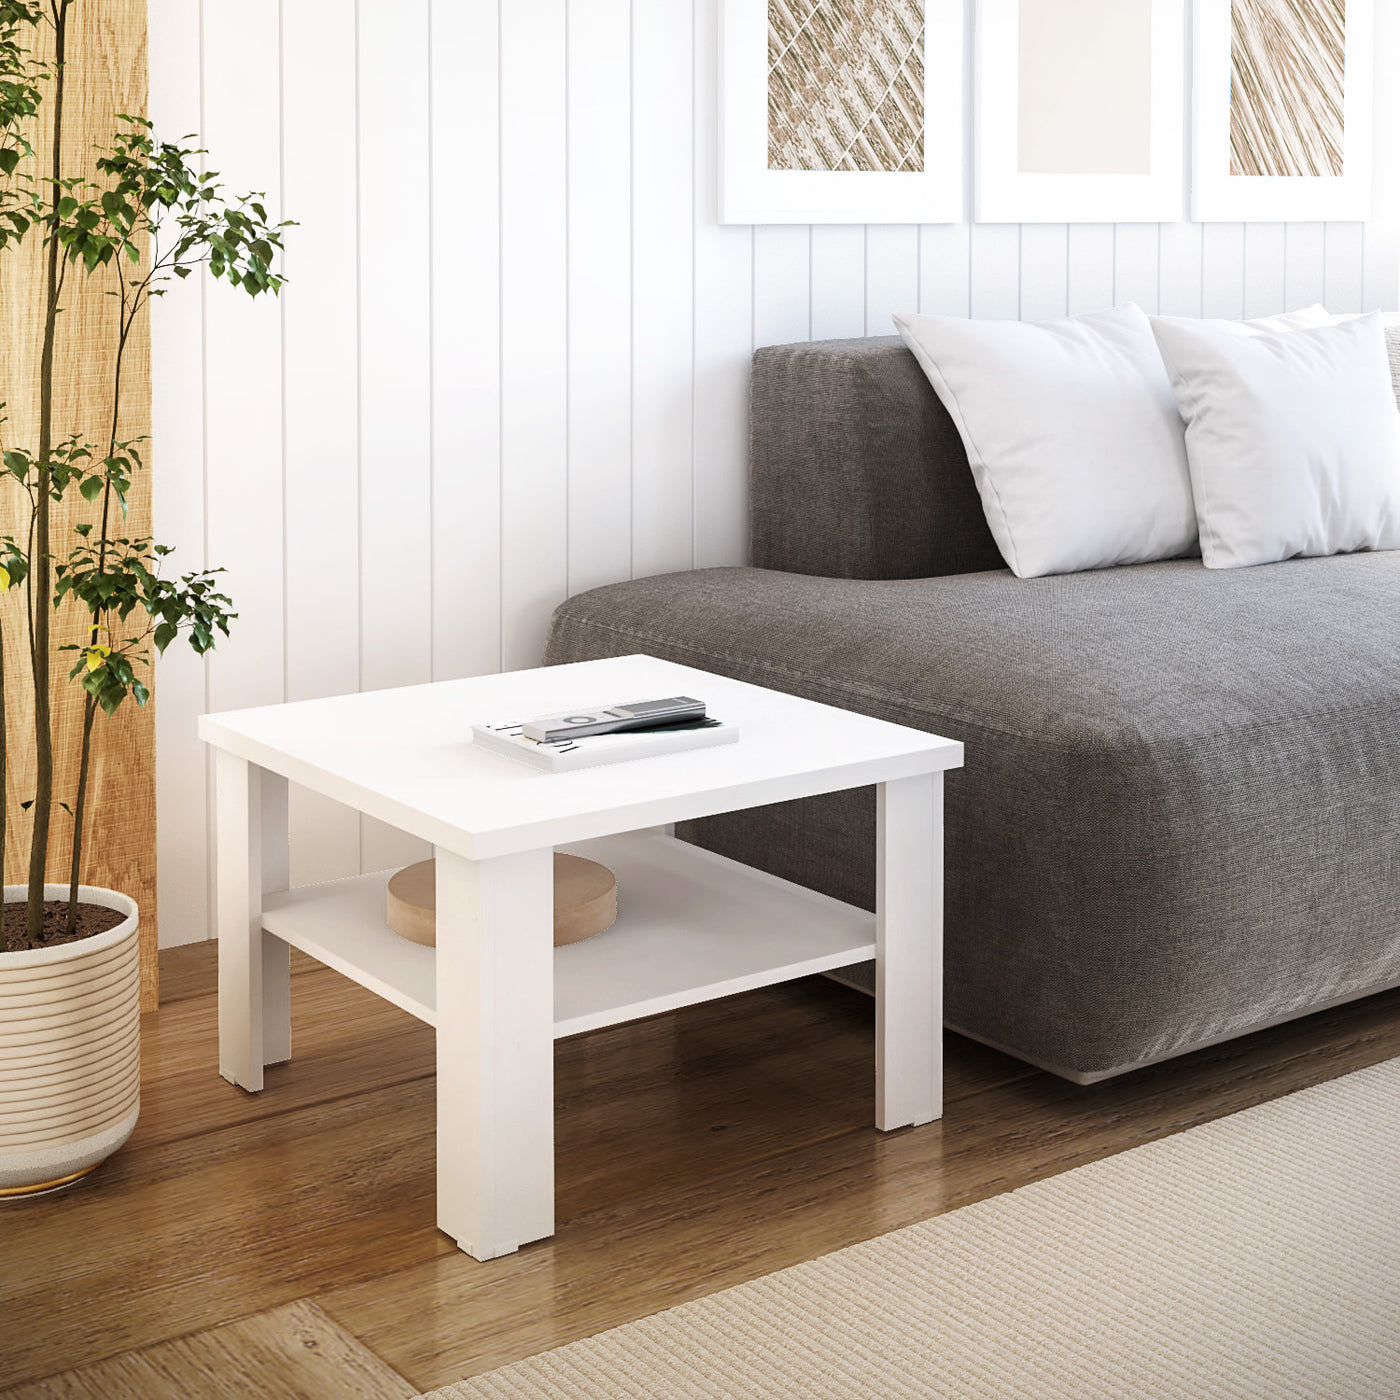 36" White End Table